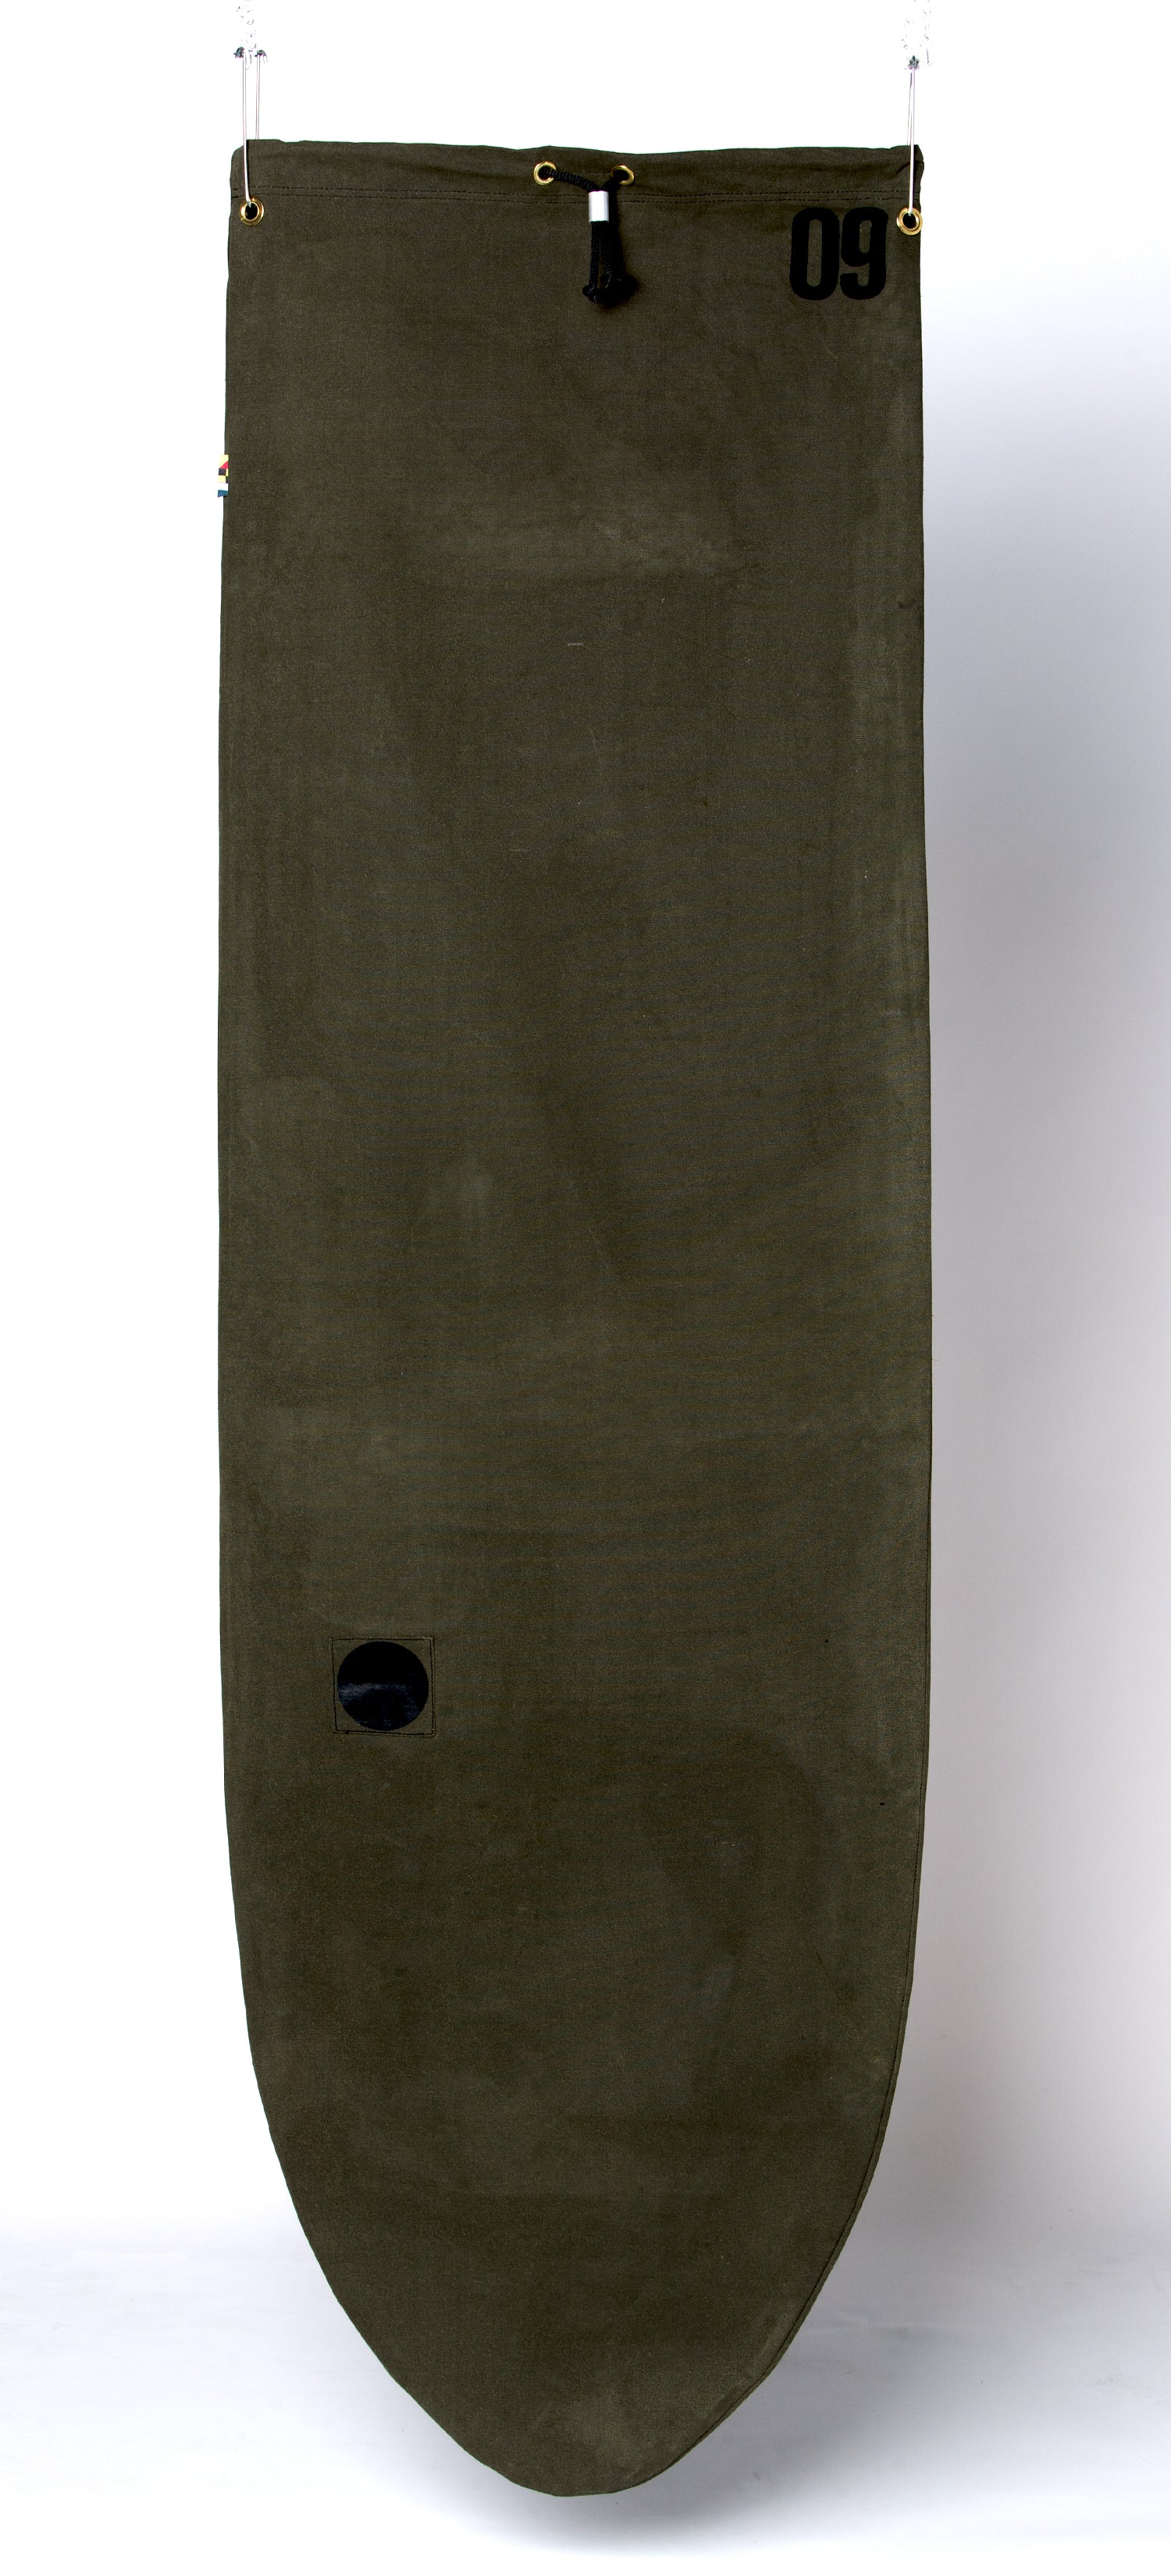 ola canvas round nose surfboard board bag military green